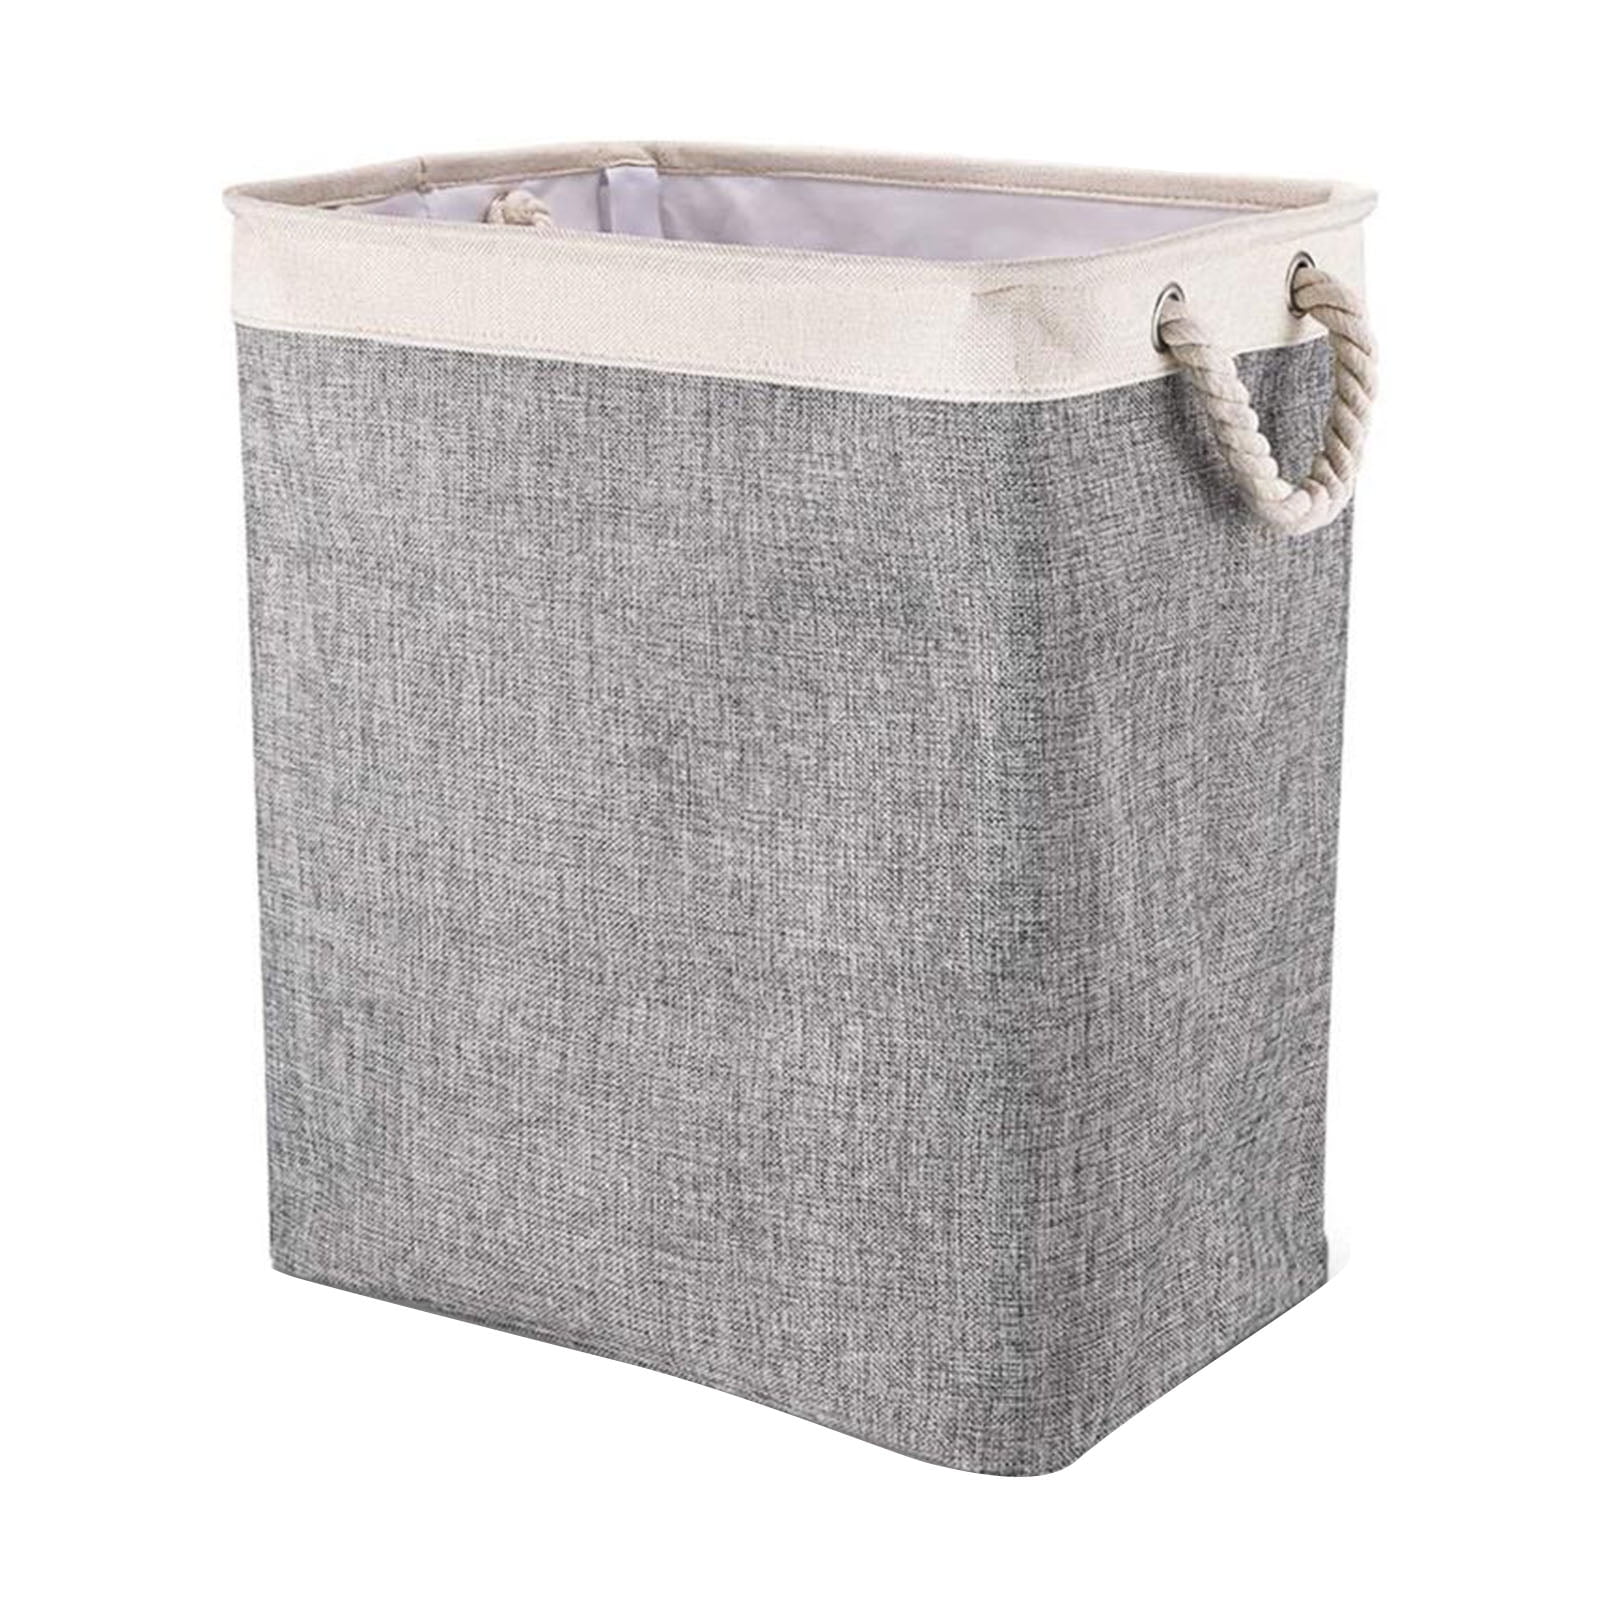 Foldable Laundry Basket Clothes Hamper Large Capacity Durable With Wheels 